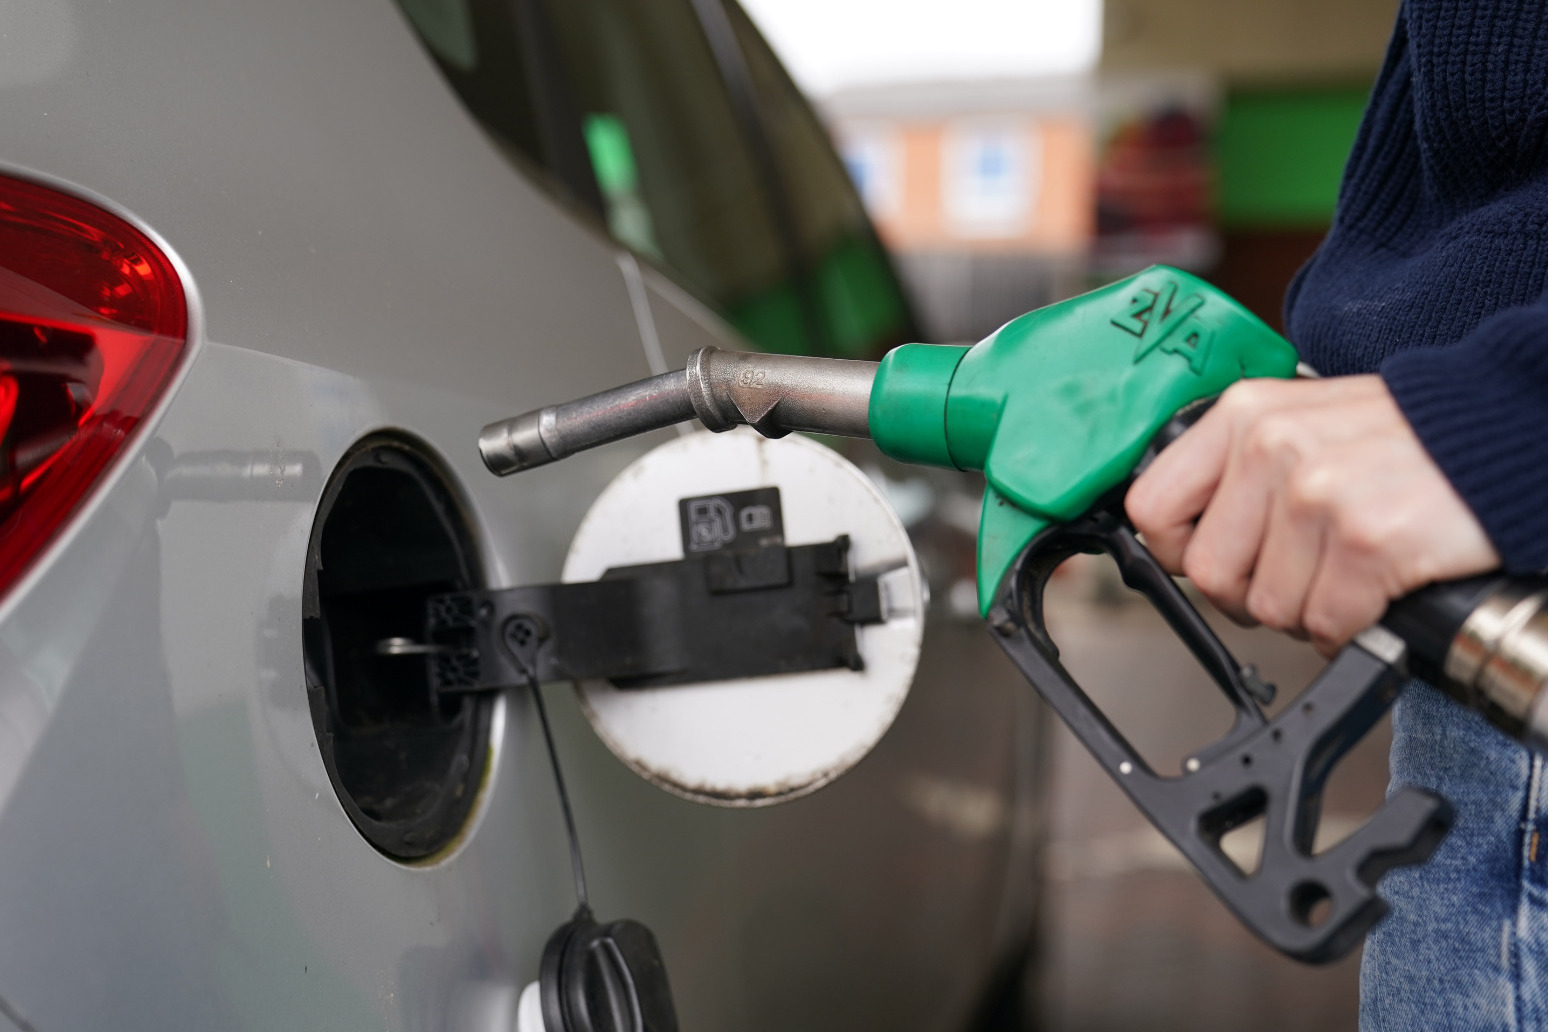 Petrol up 8p per litre since start of year